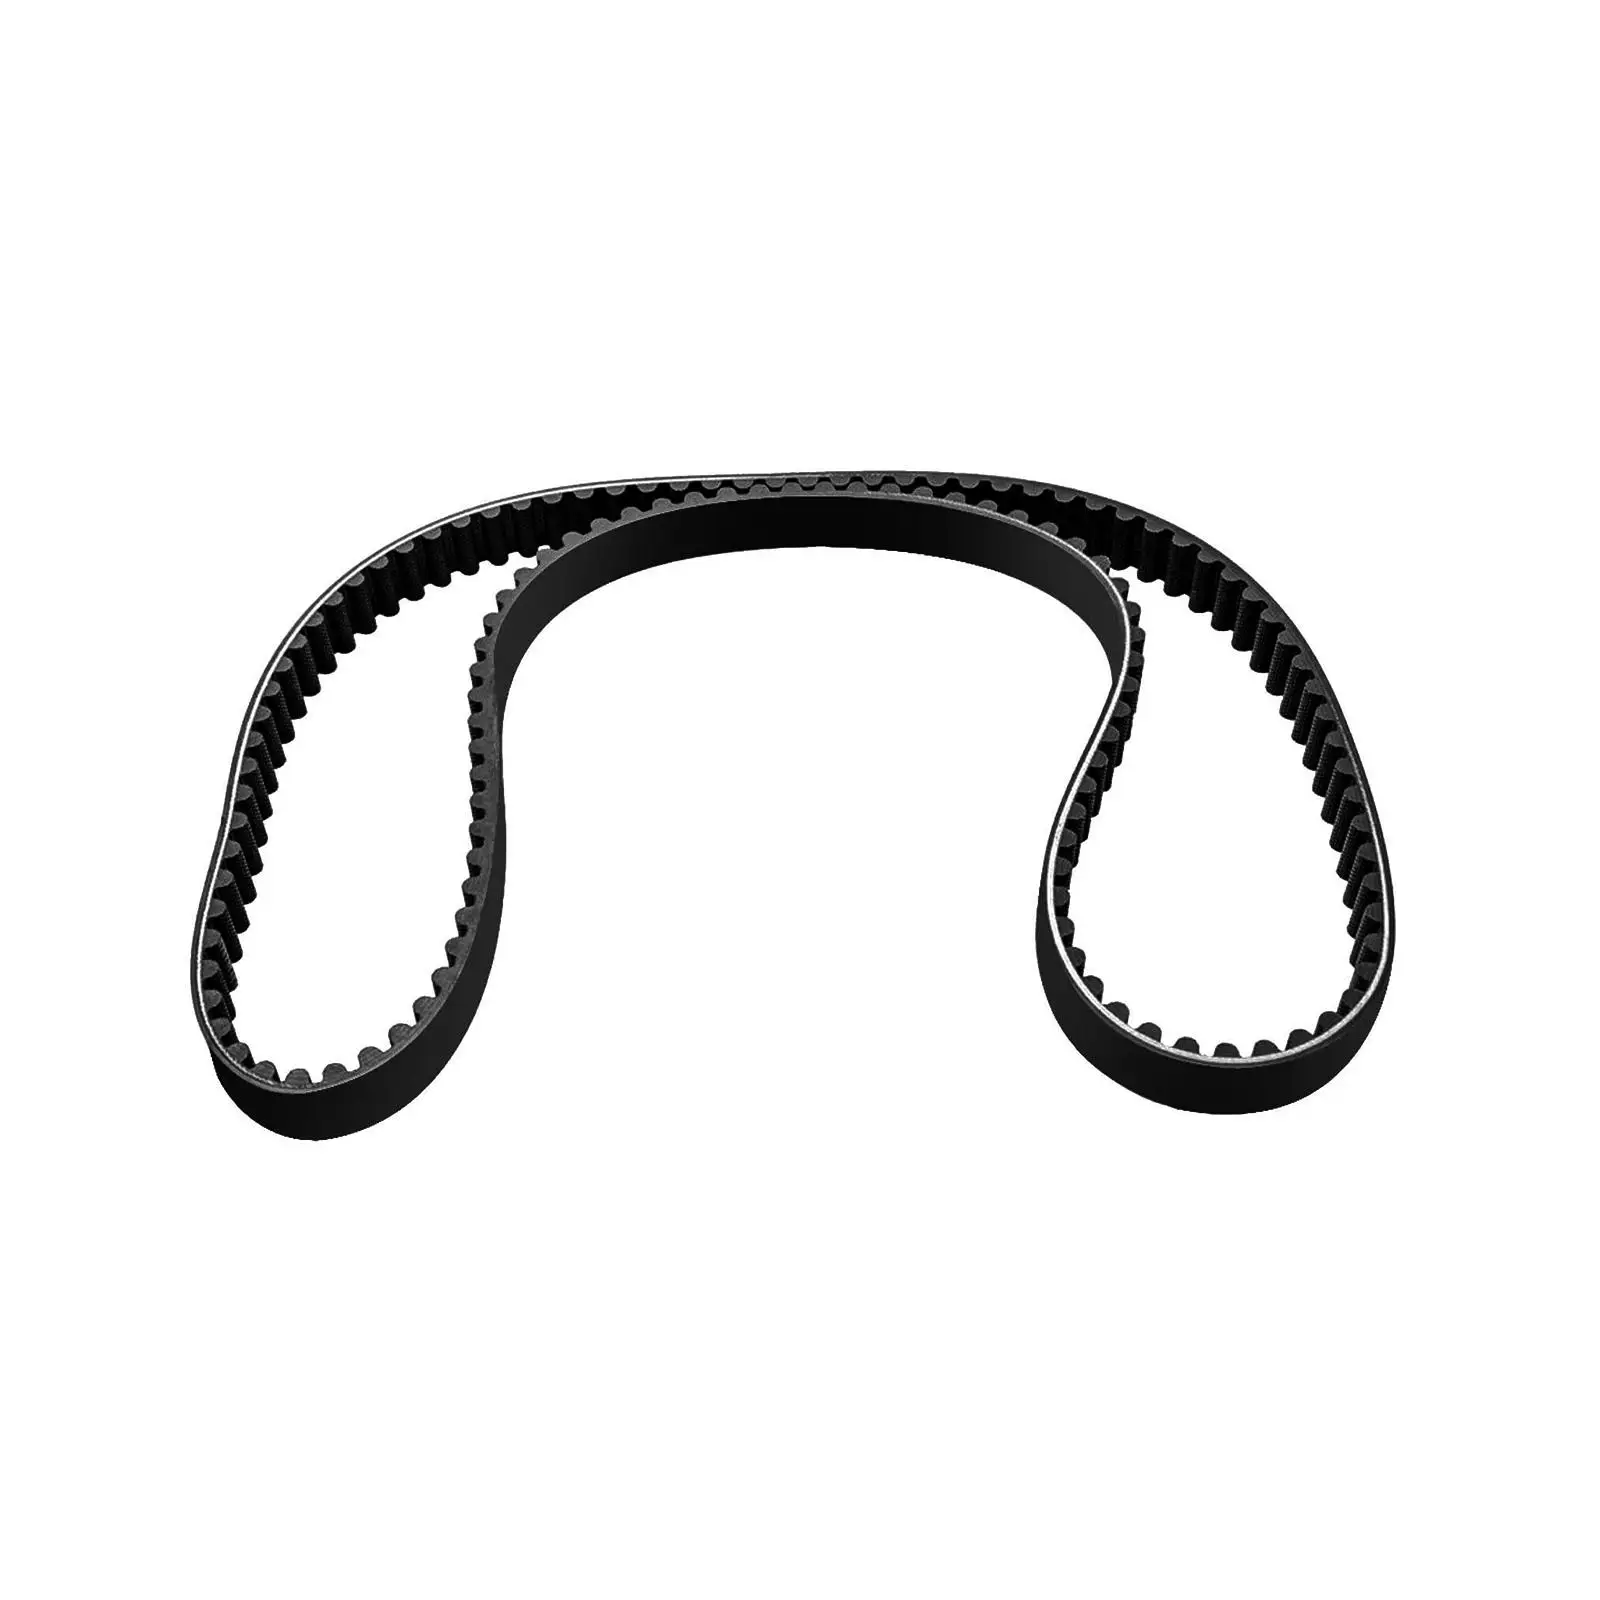 Rear Drive Belt 40001-85 Accessory 136 Tooth 1 1/2